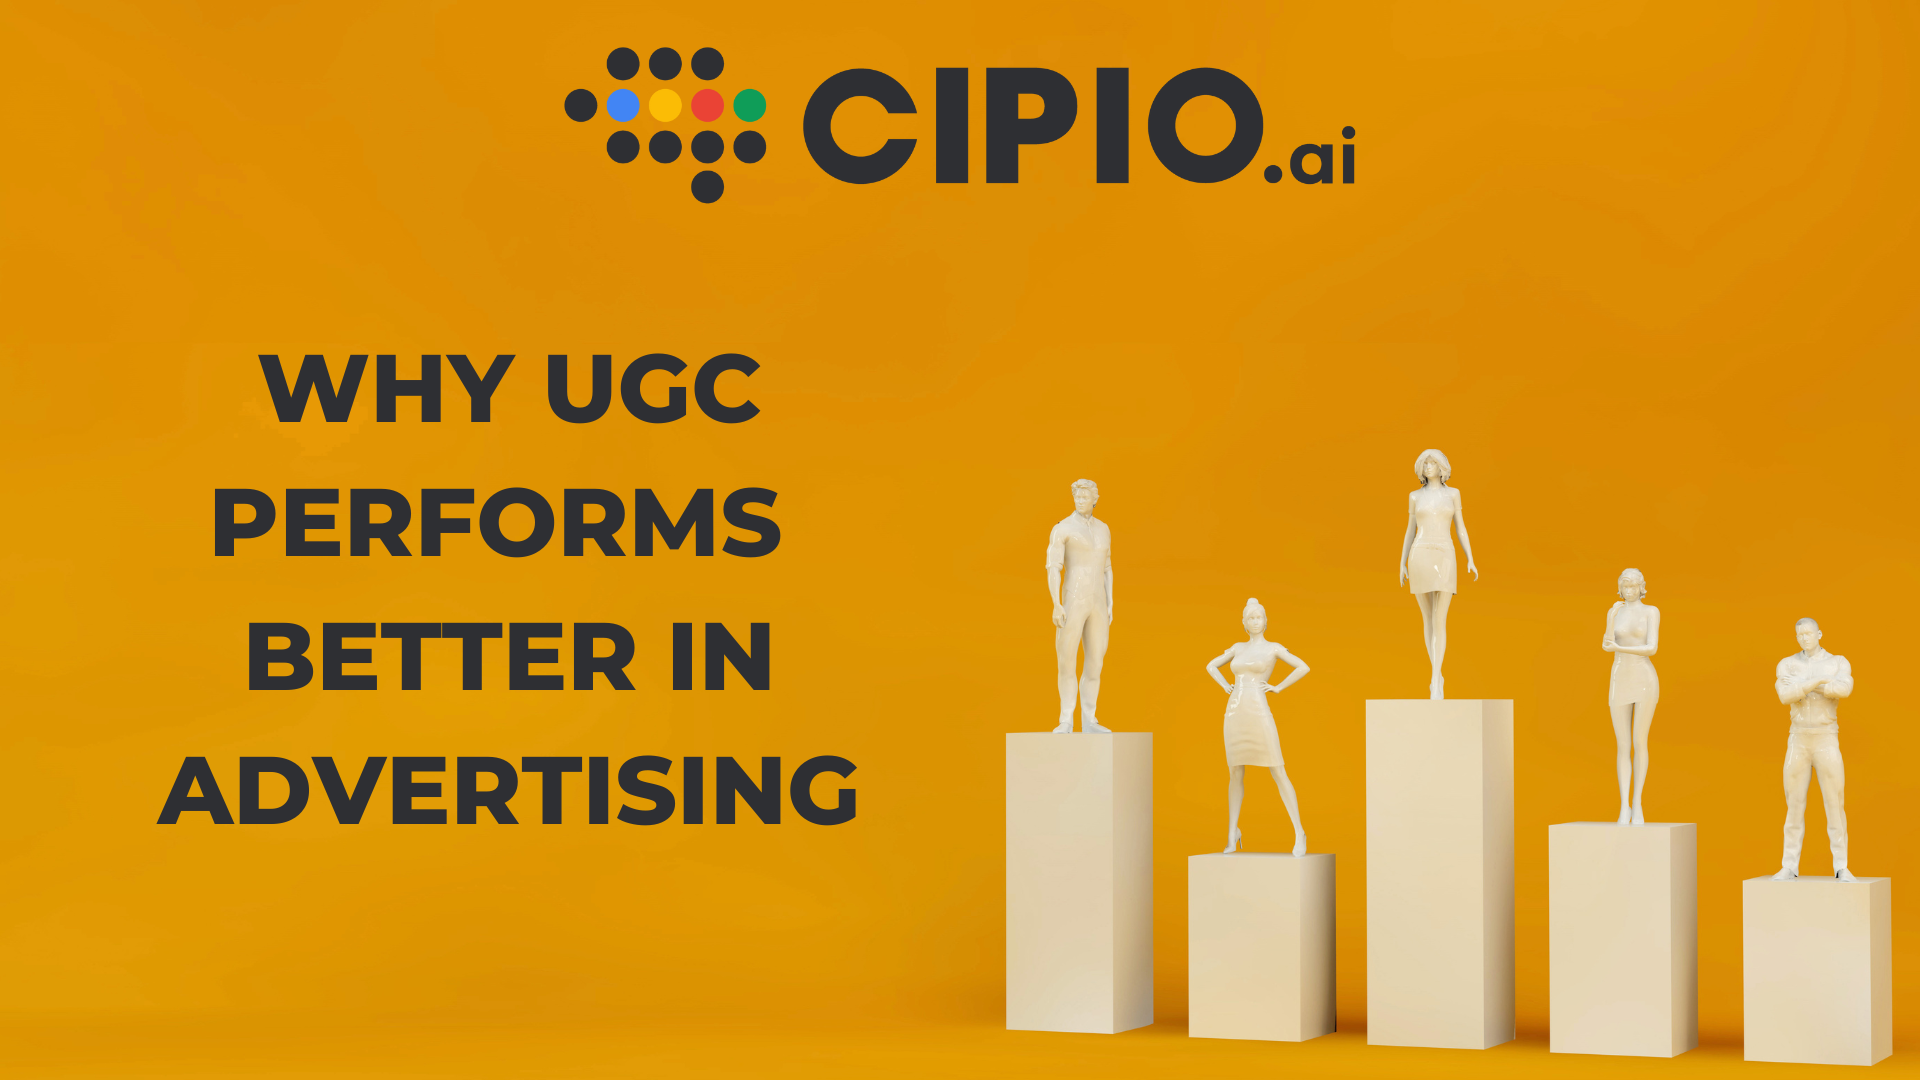 Why UGC Performs Better in Advertising